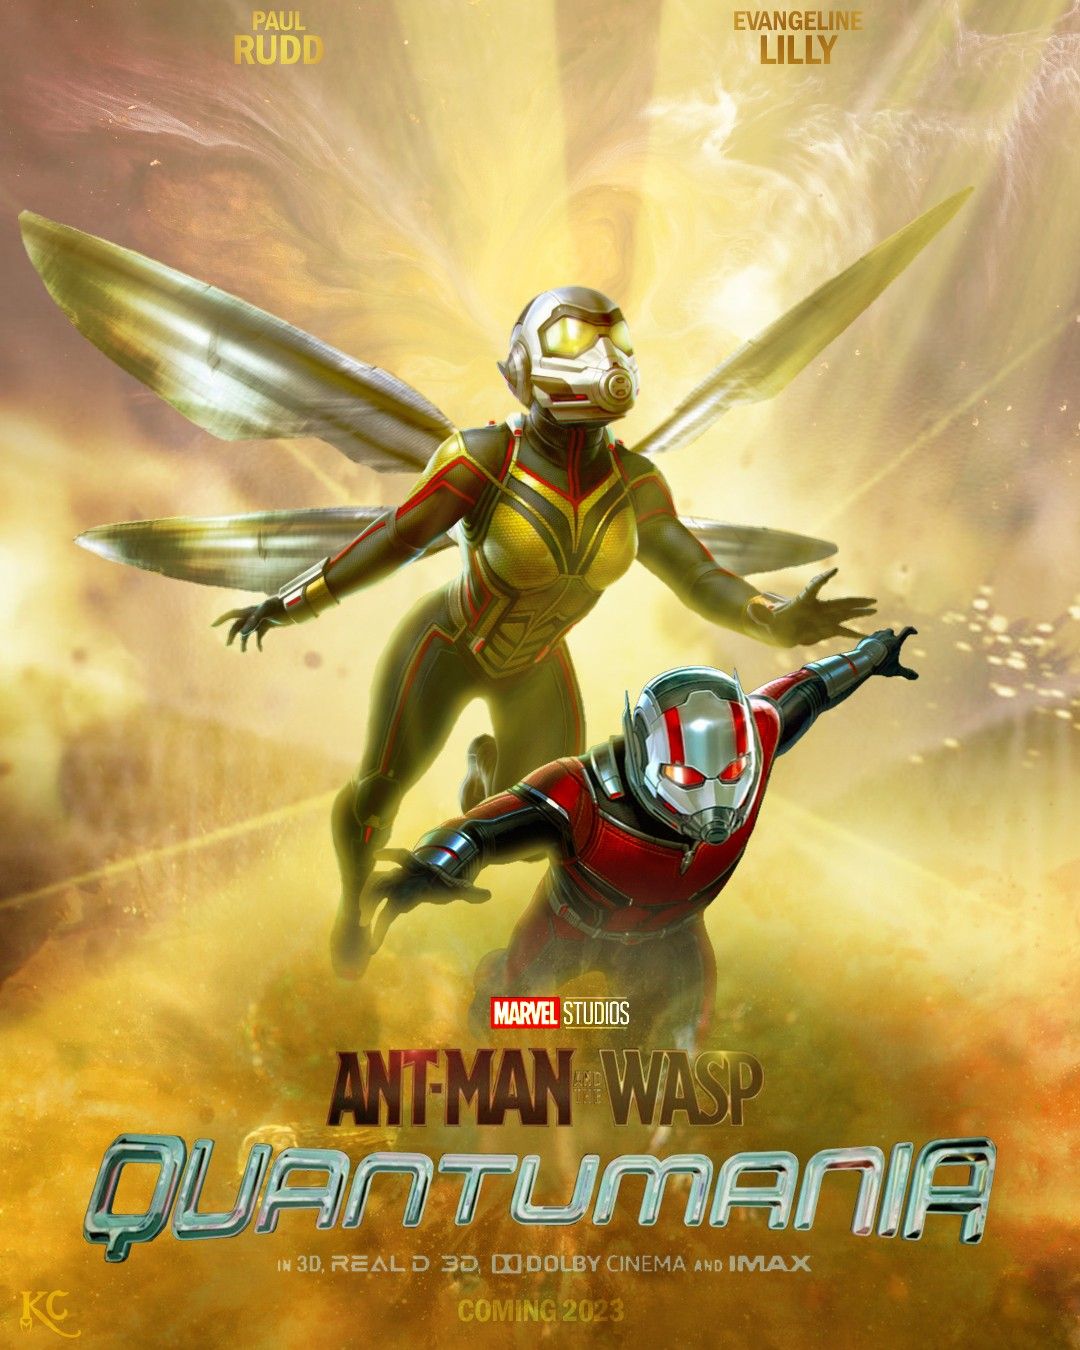 Ant Man And The Wasp Quantumania Movie Poster. Marvel Movie Posters, Ant Man, Marvel Movies